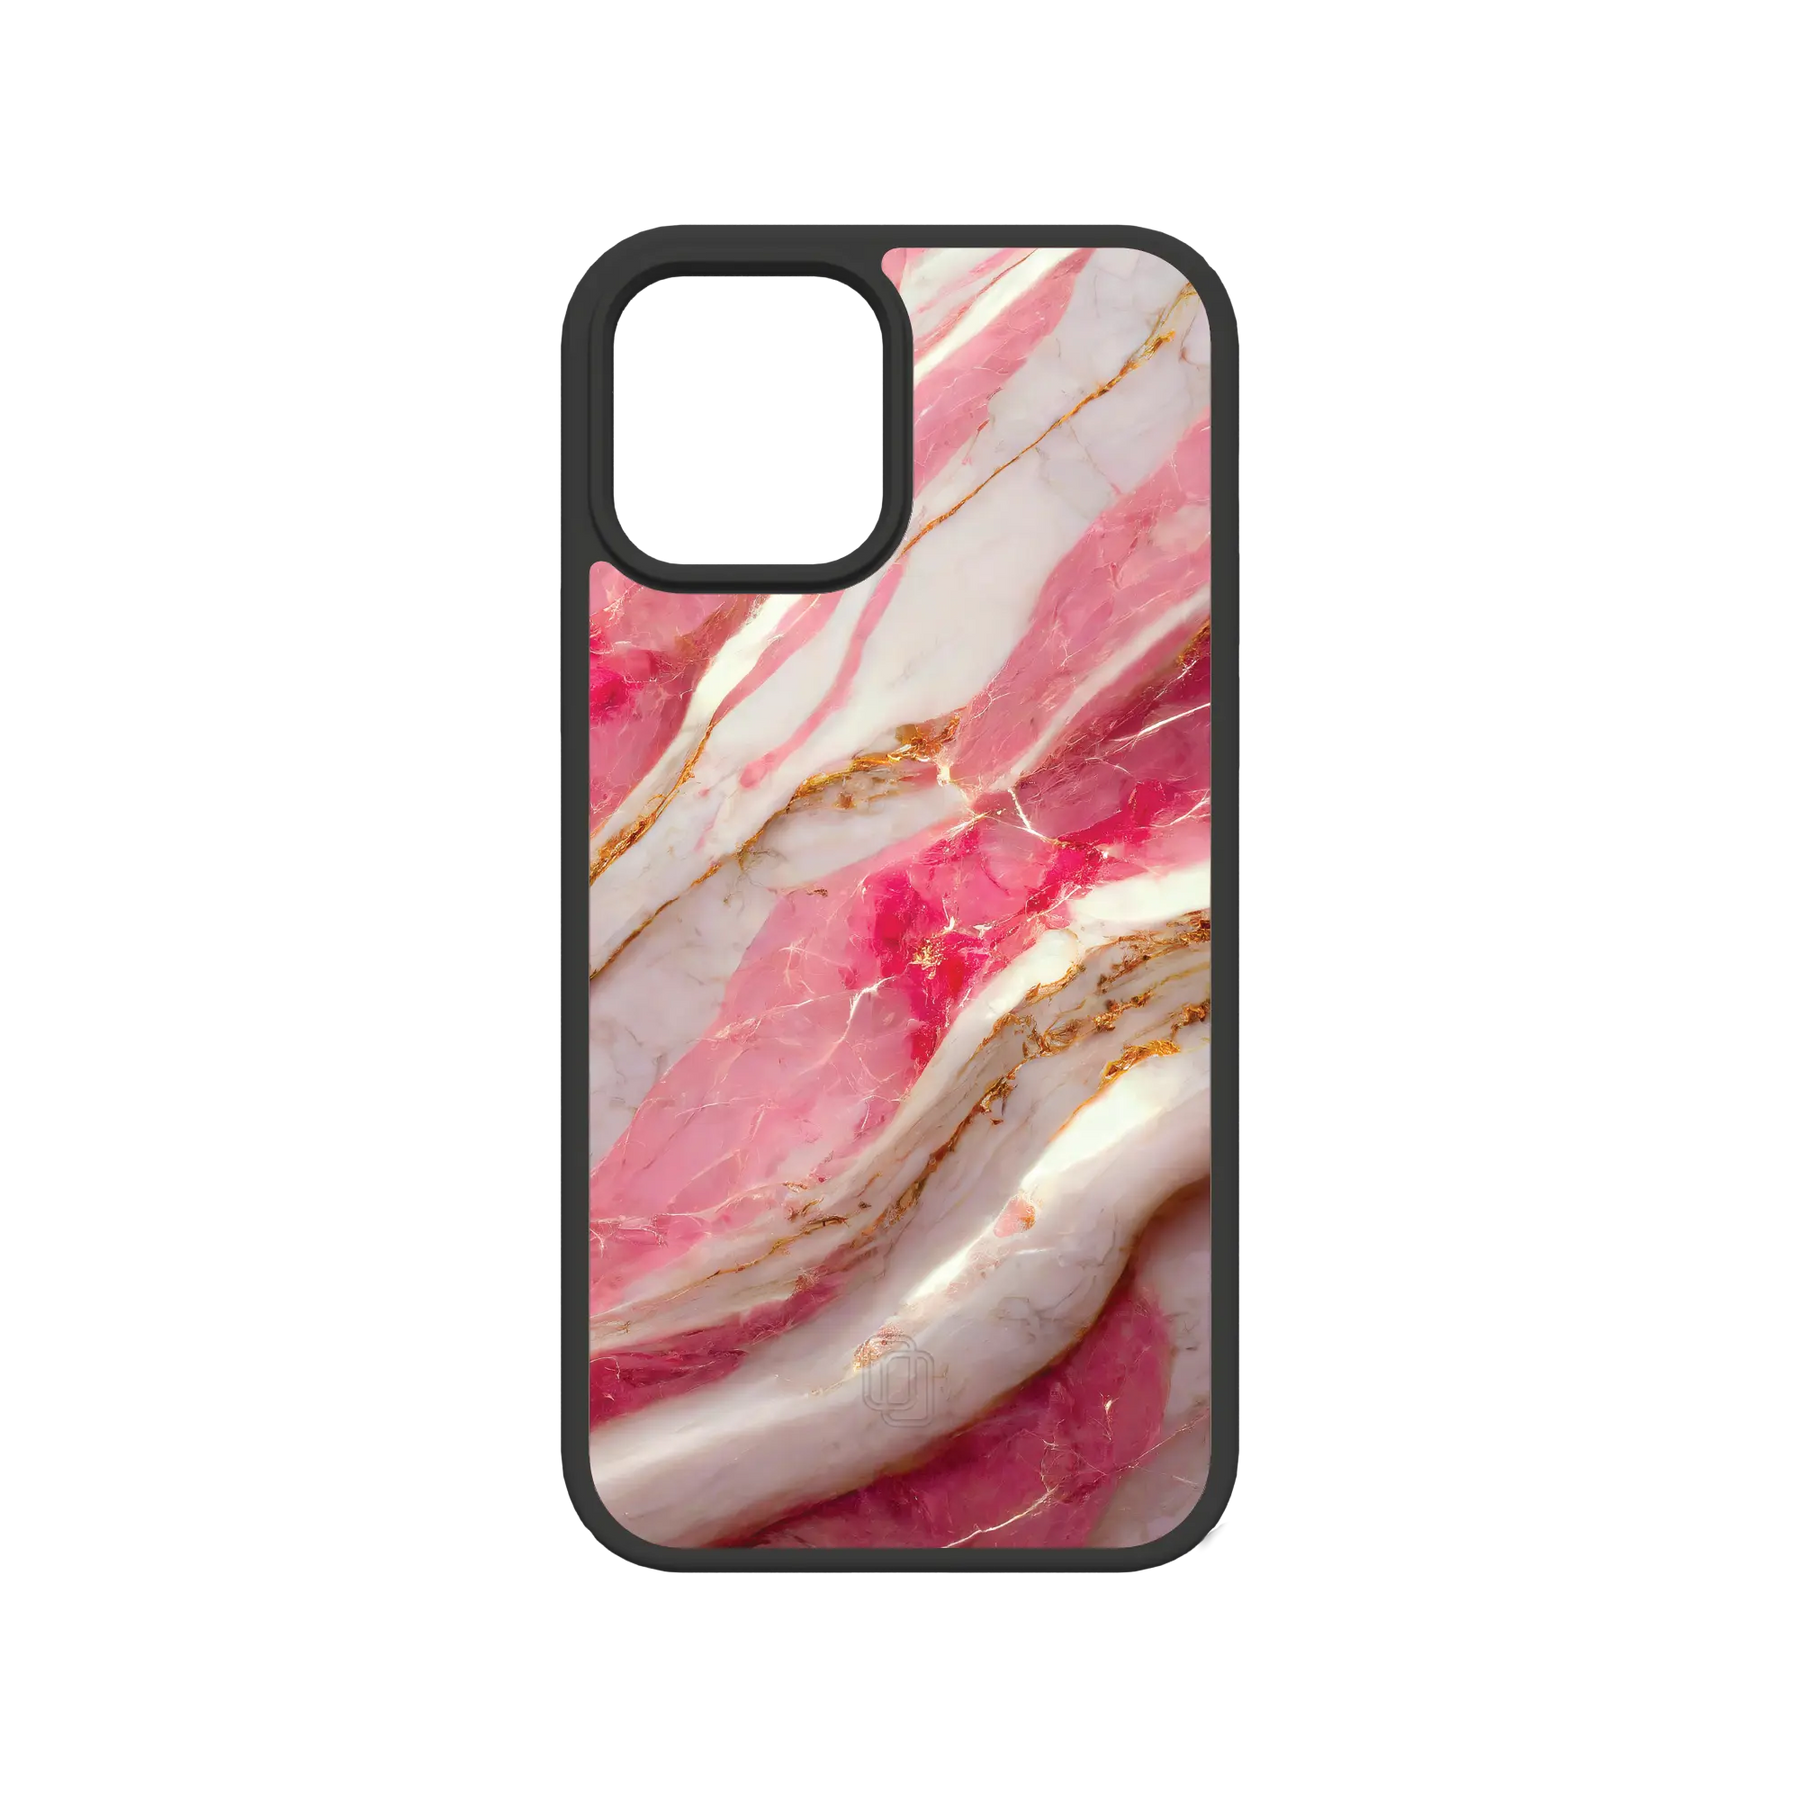 Apple-iPhone-12-12-Pro-Crystal-Clear New Dawn | Protective MagSafe Pink Marble Case | Marble Stone Collection for Apple iPhone 12 Series cellhelmet cellhelmet